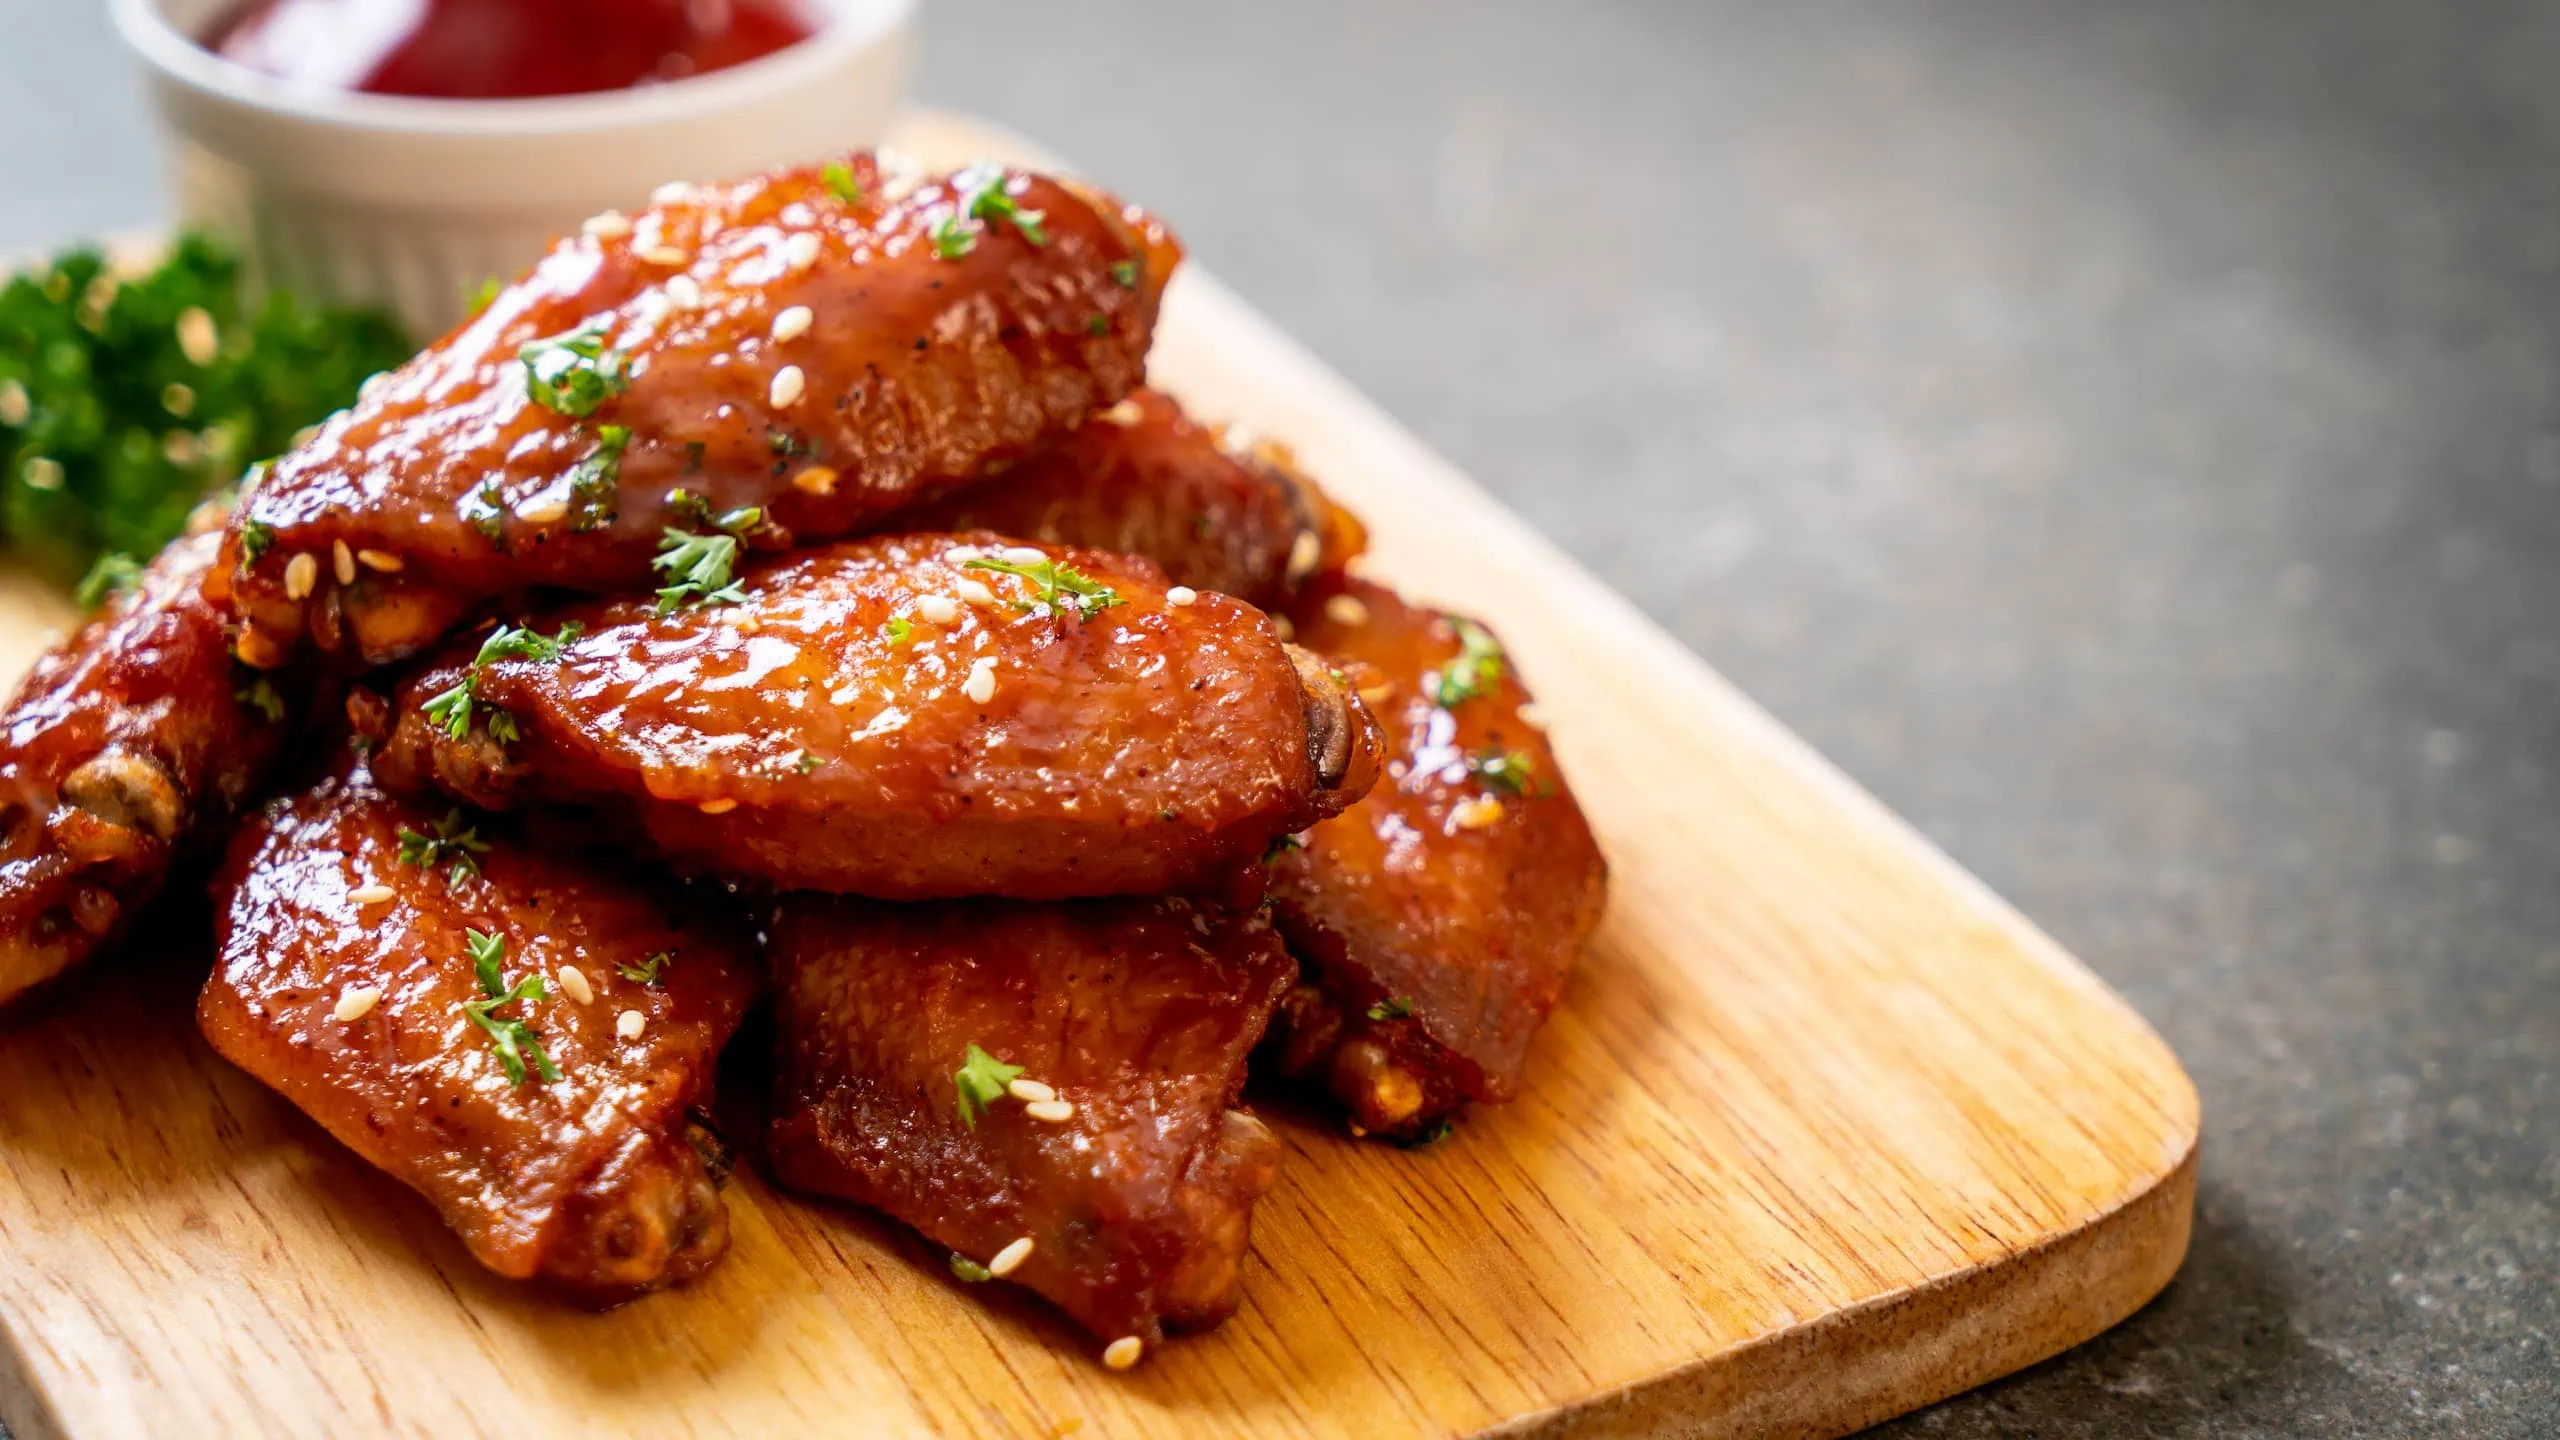 Our heavenly Hennessy wings recipe